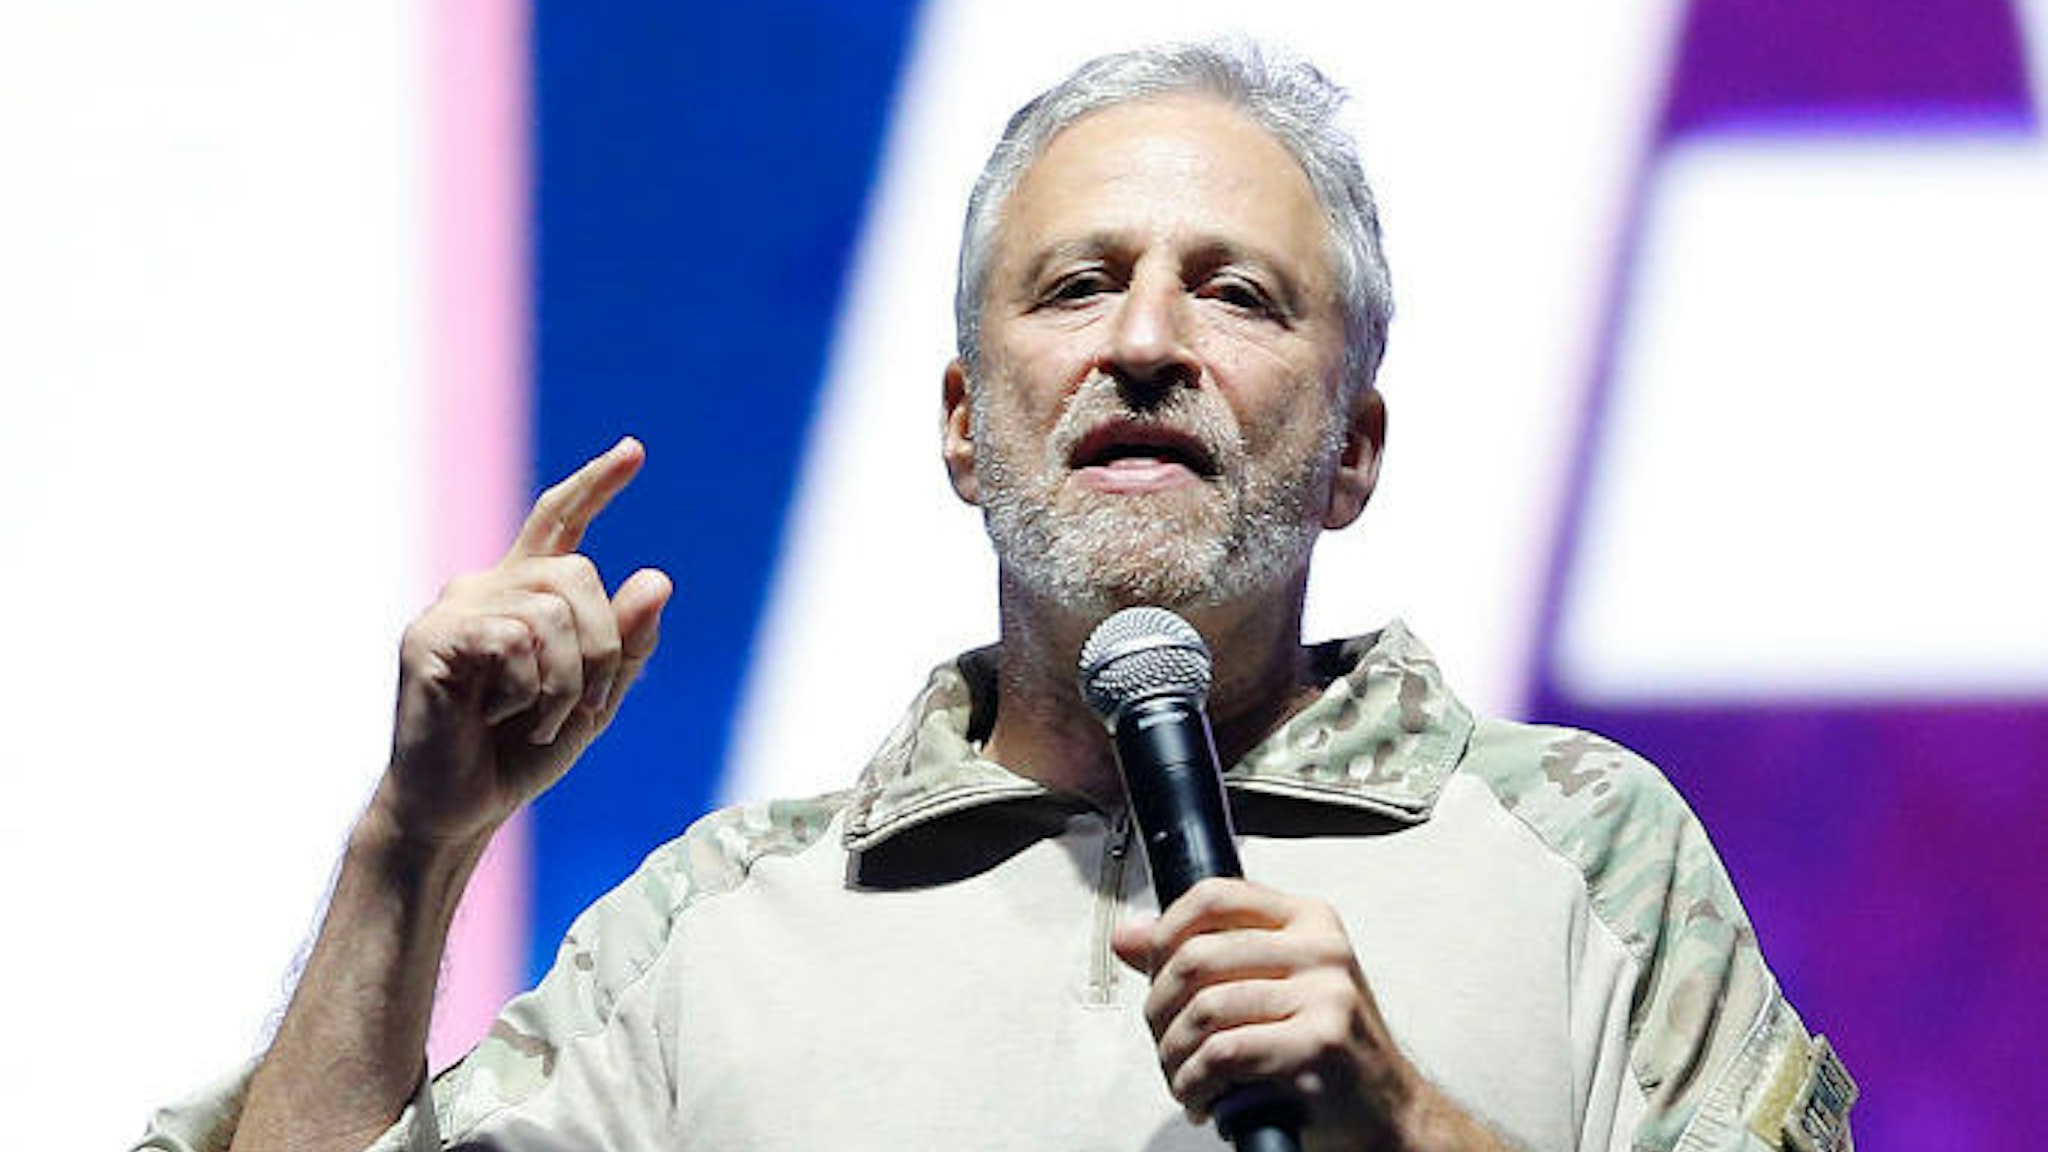 Jon Stewart speaks on stage during the opening ceremony of the 2019 Warrior Games at Amalie Arena on June 22, 2019 in Tampa, Florida. (Photo by Michael Reaves/Getty Images)